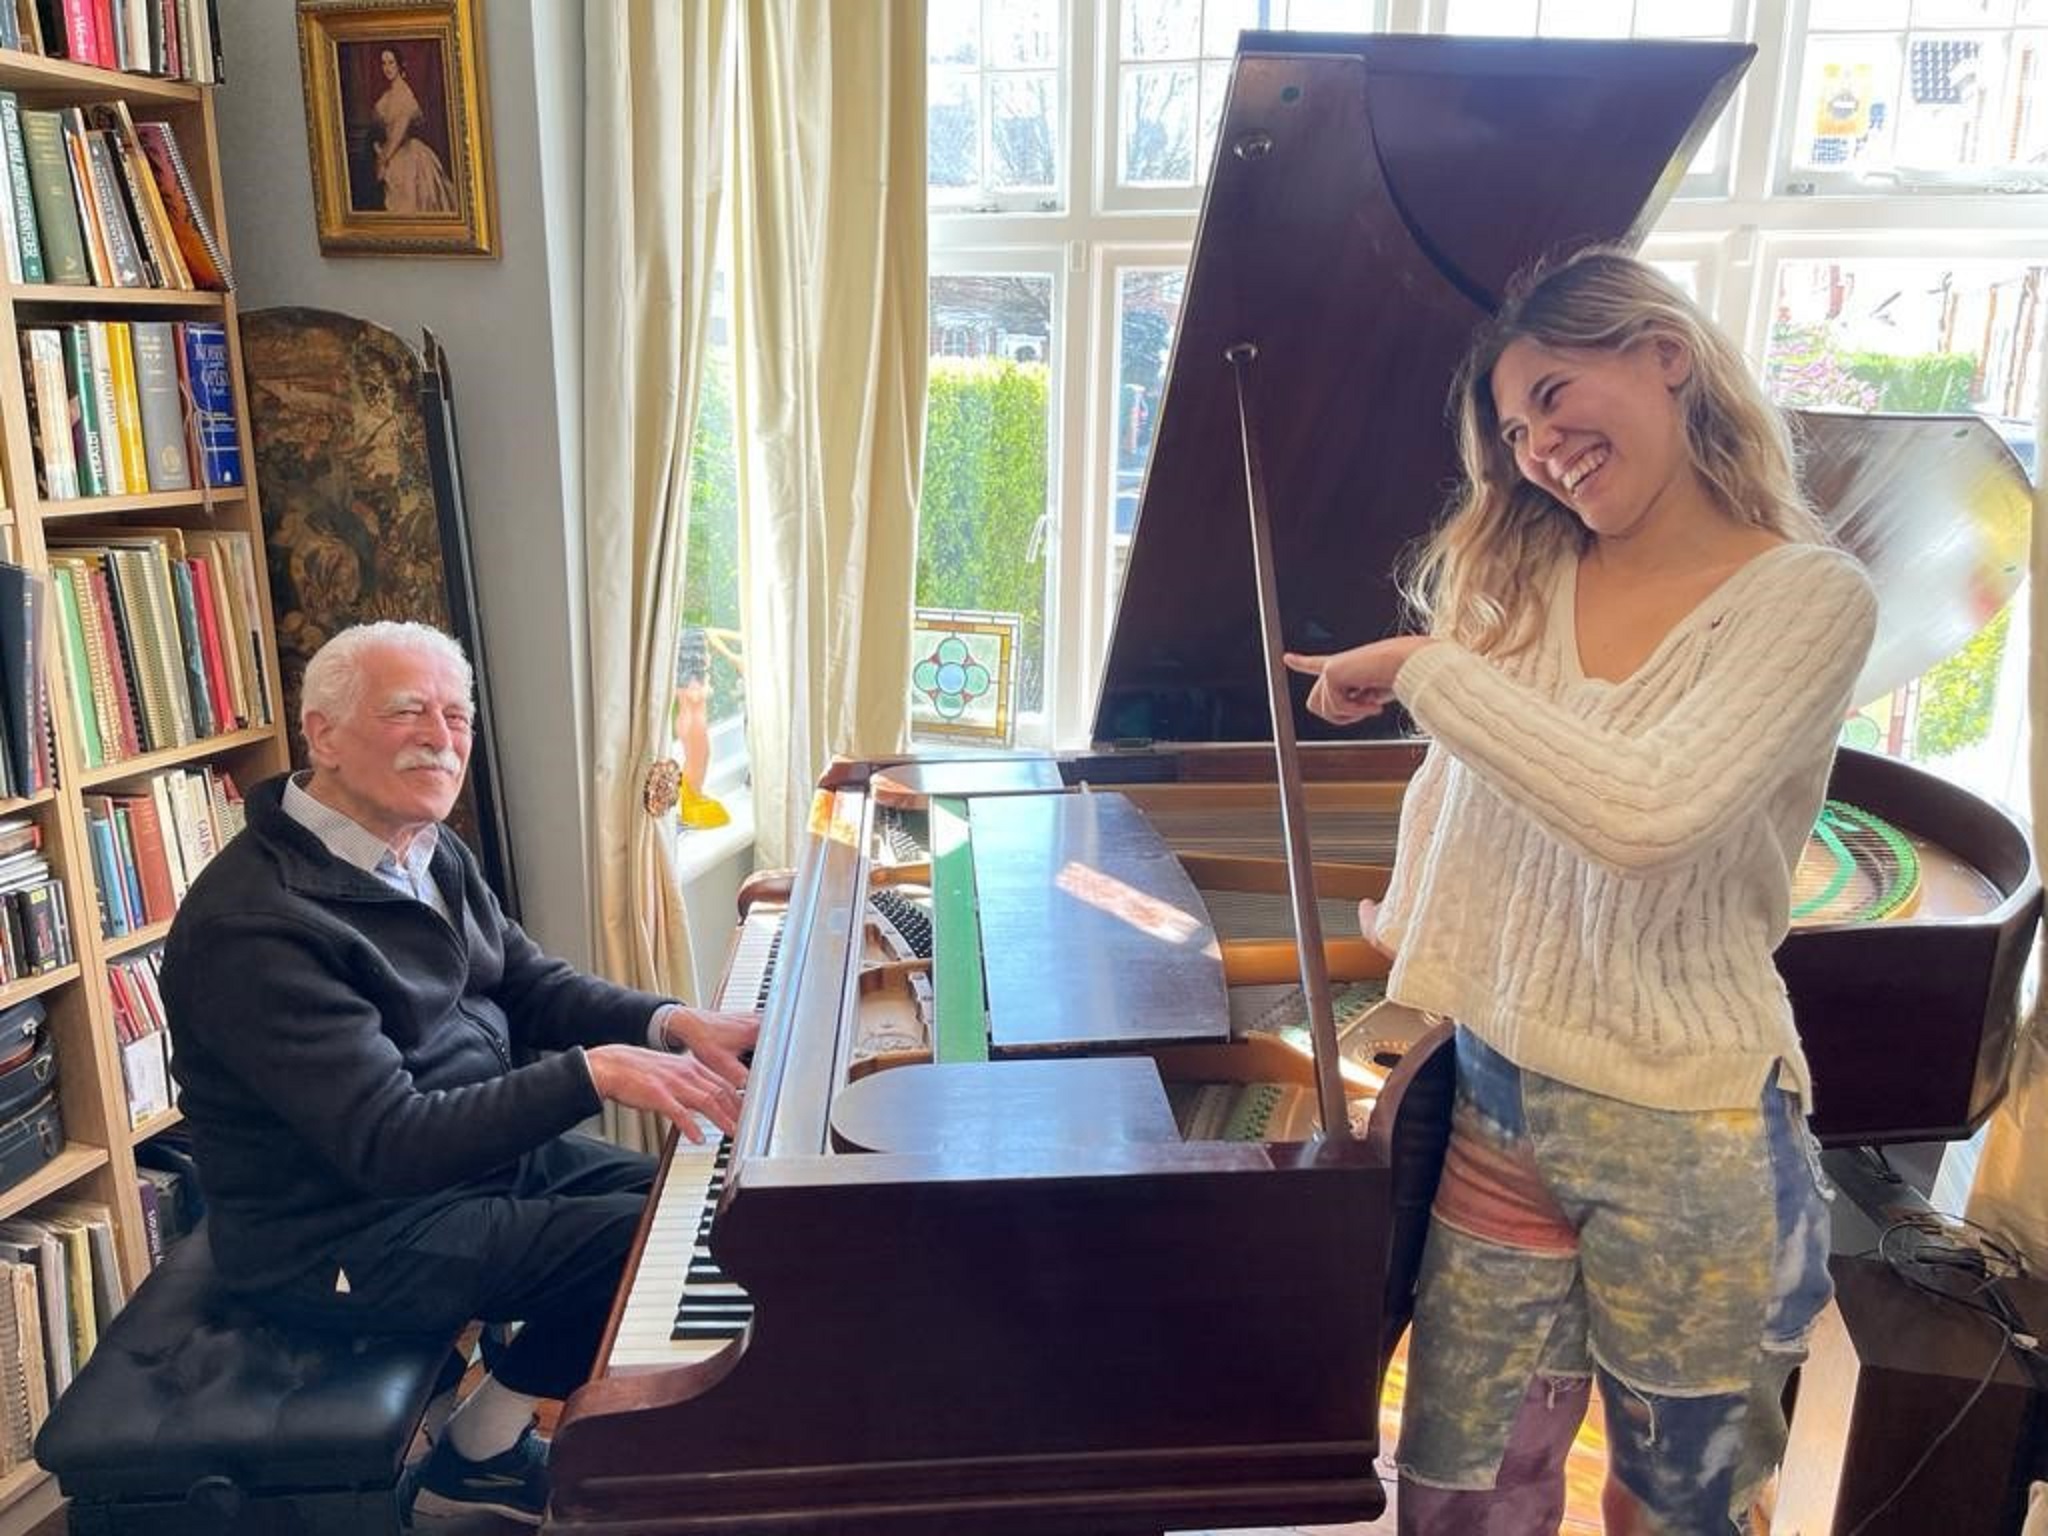 Alan Melinek playing the piano with his granddaughter Bella